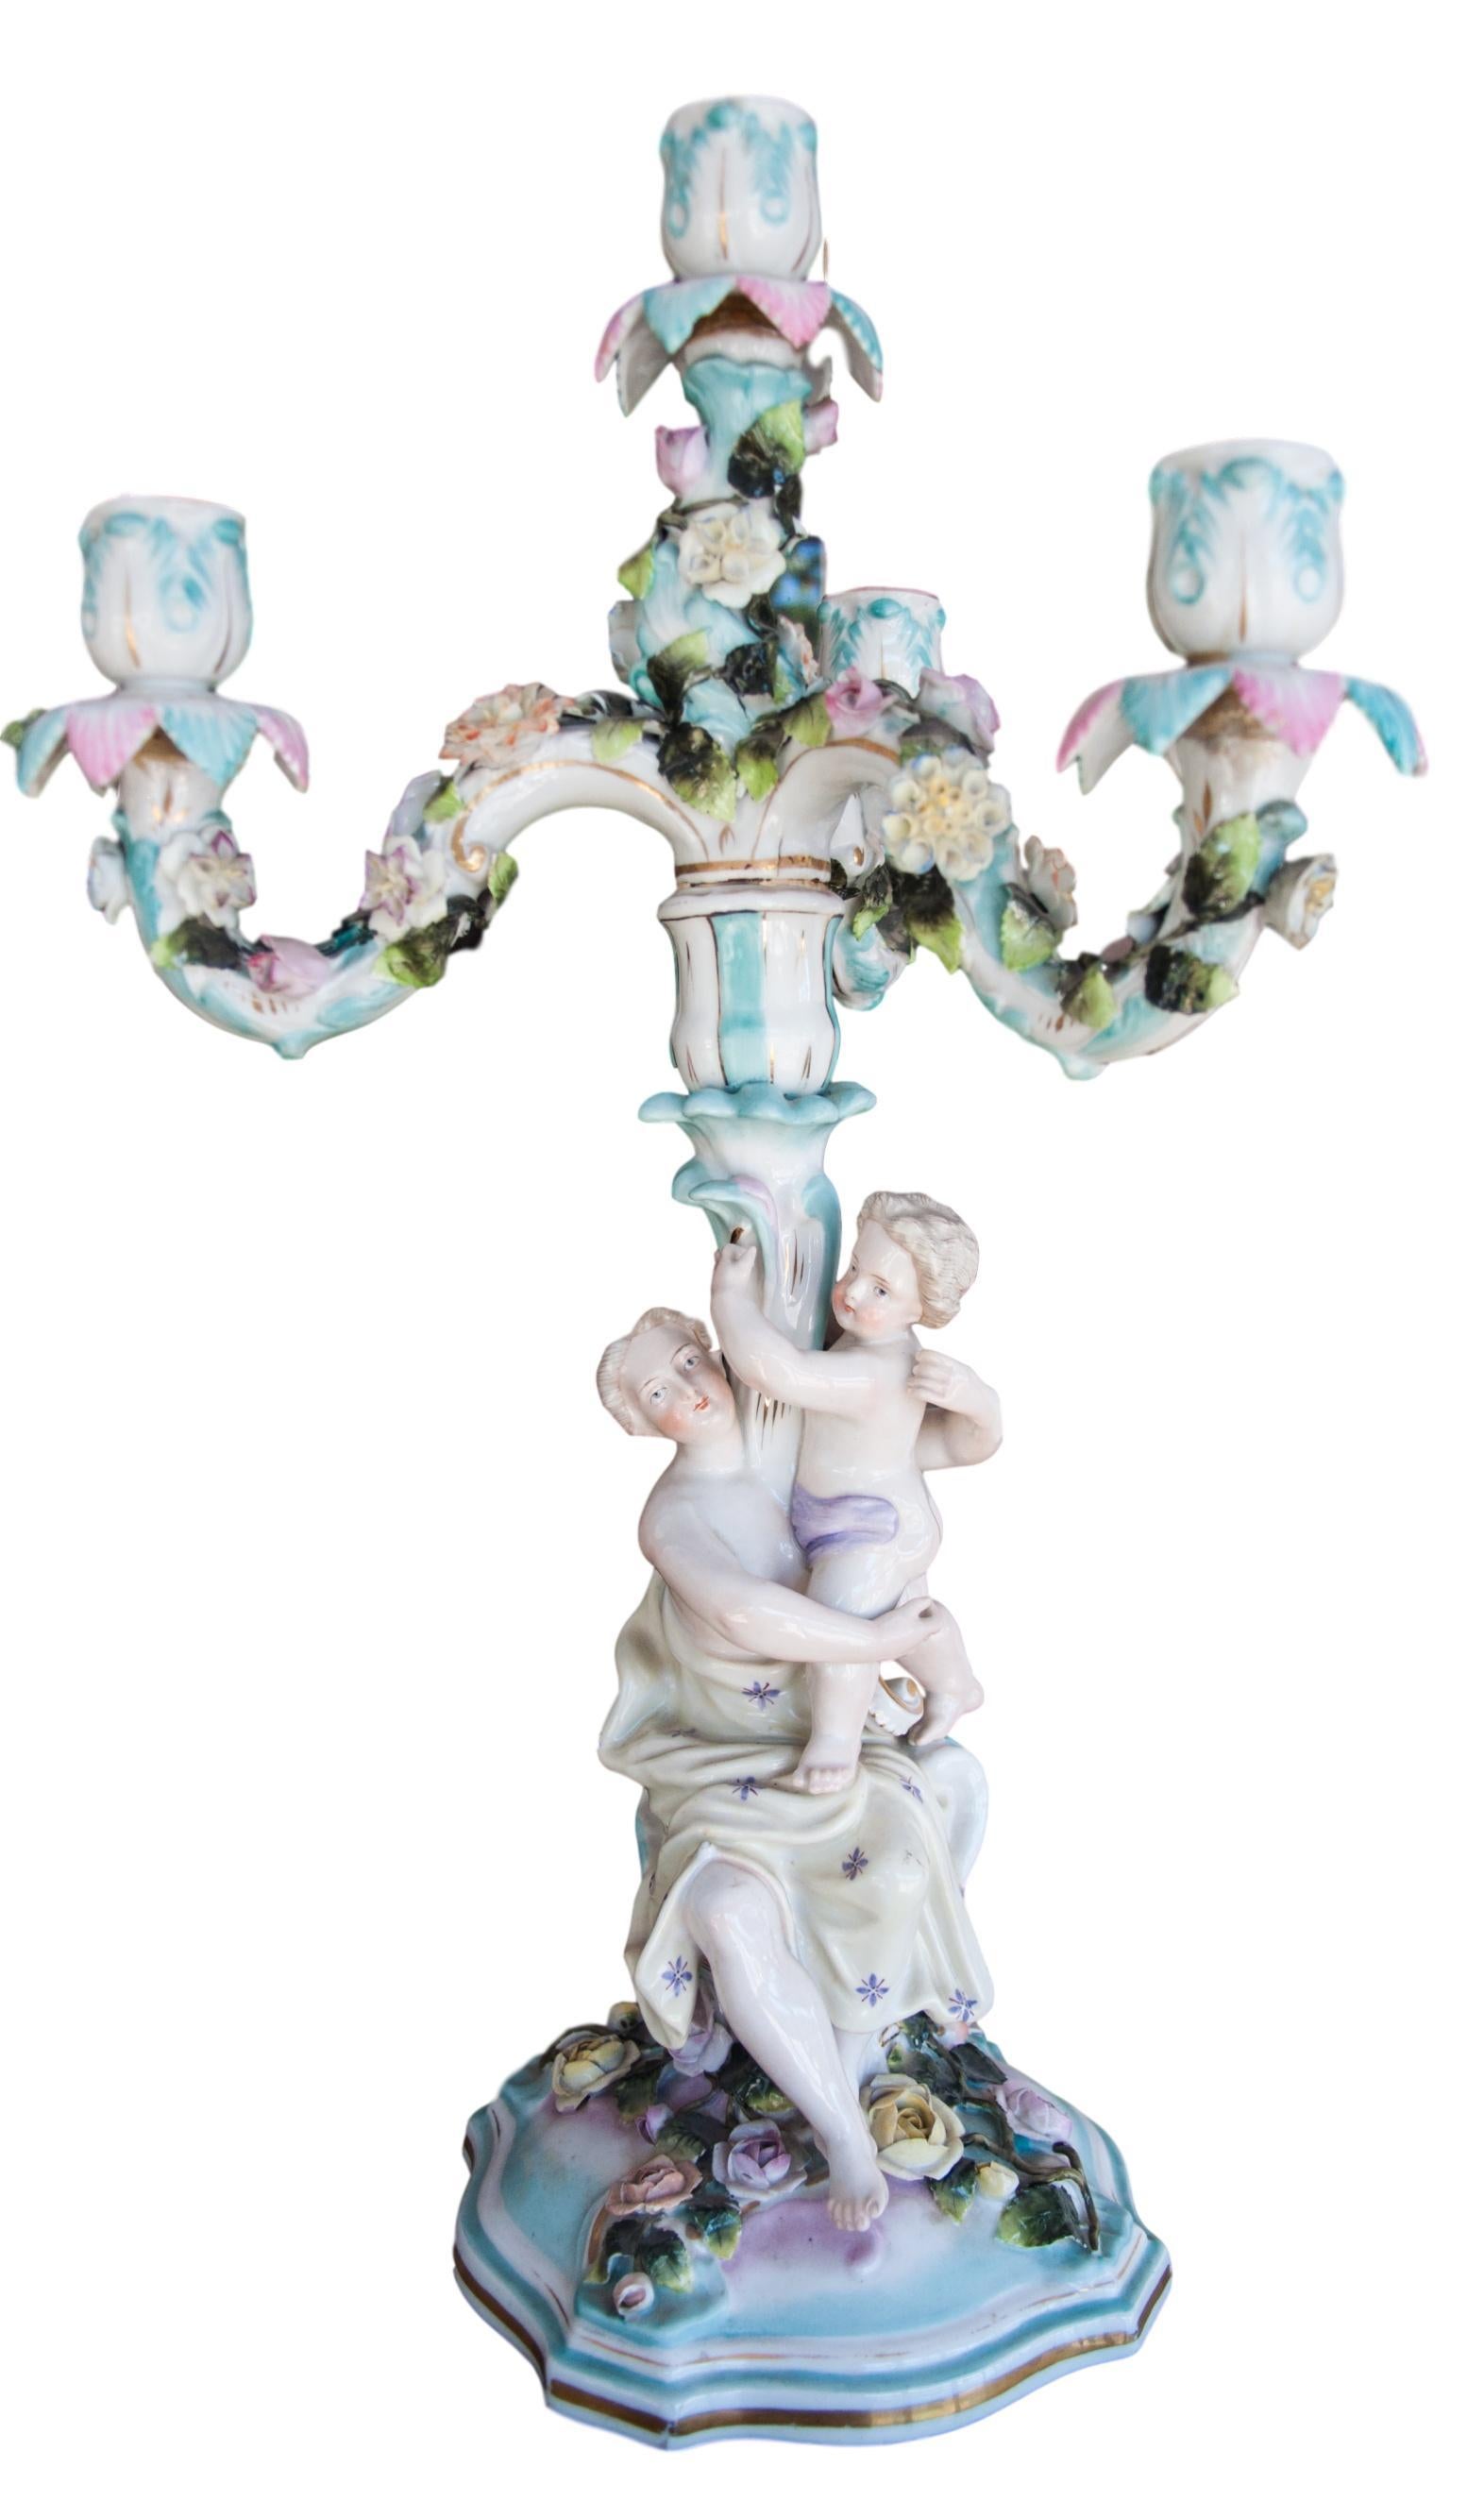 Pair of century Dresden Porcelain candlesticks, circa mid-19th century by Sitzendorf. Vibrant coloration and marked on the bottom, pictured. In great condition.